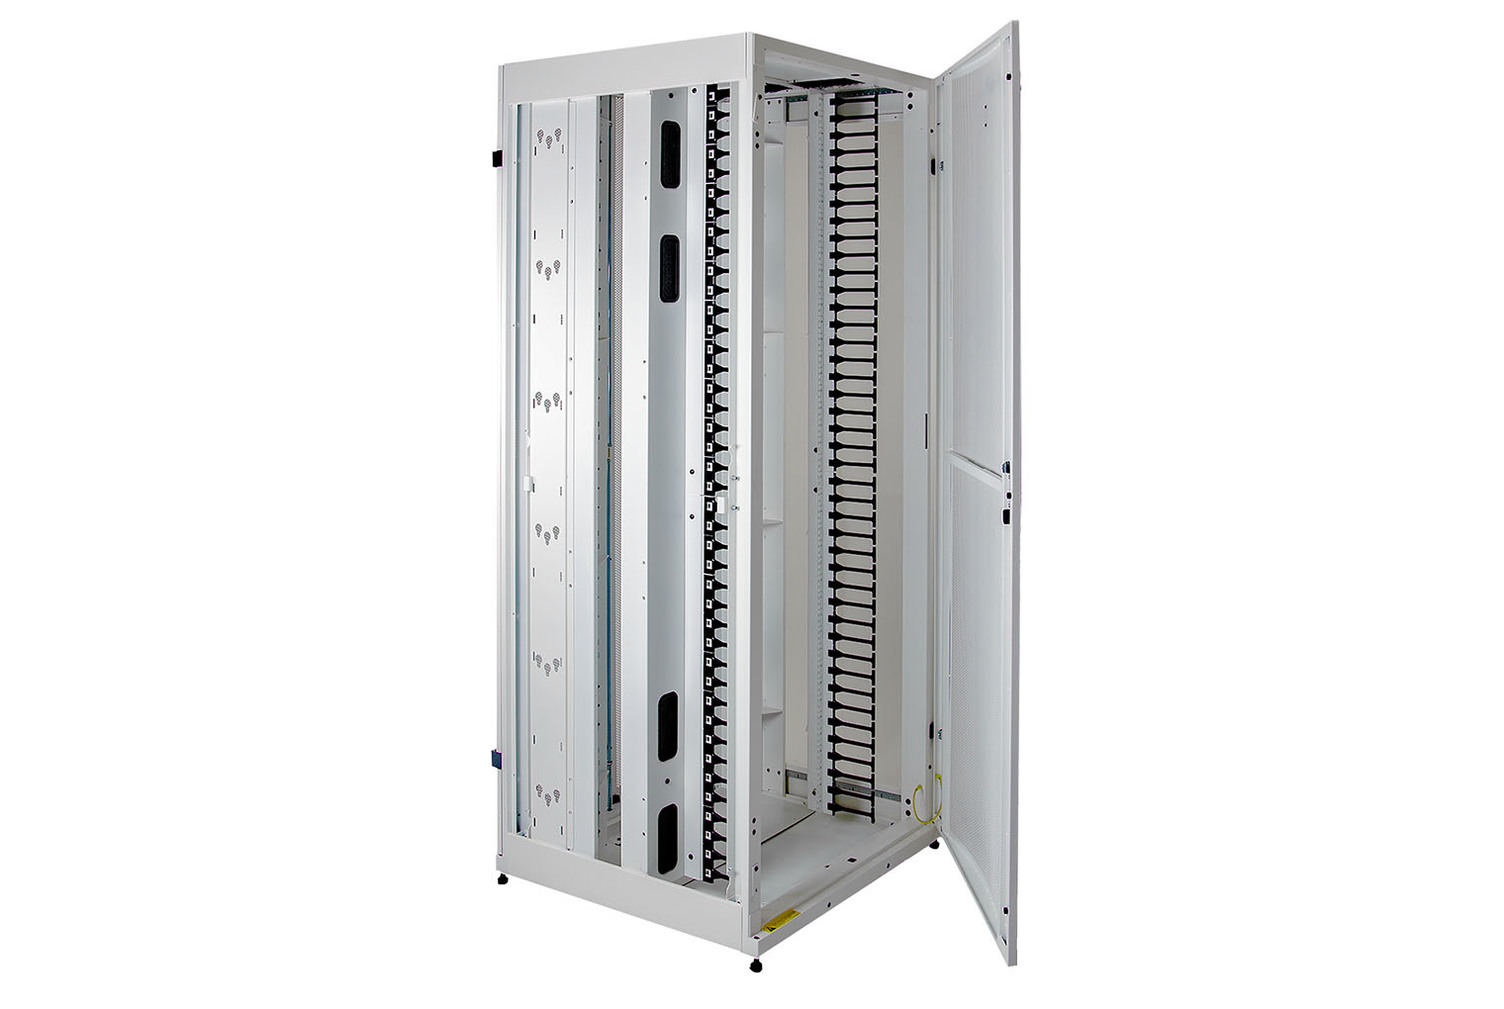 EF-Series EuroFrame™ Gen 2 Cabinet, Glacier White, Right View with Door Open